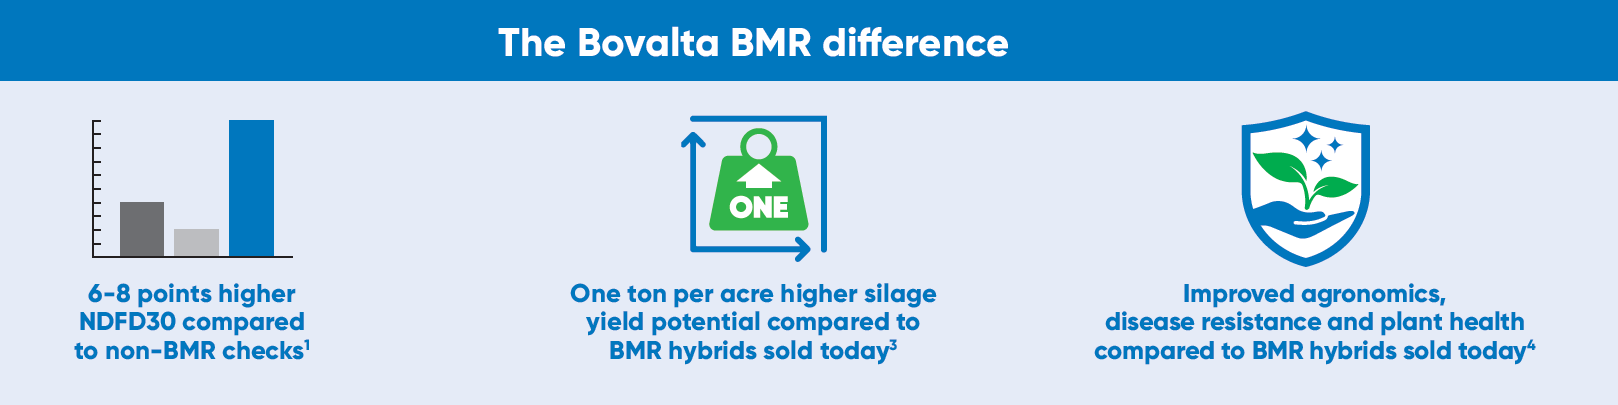 The Bovalta BMR Difference